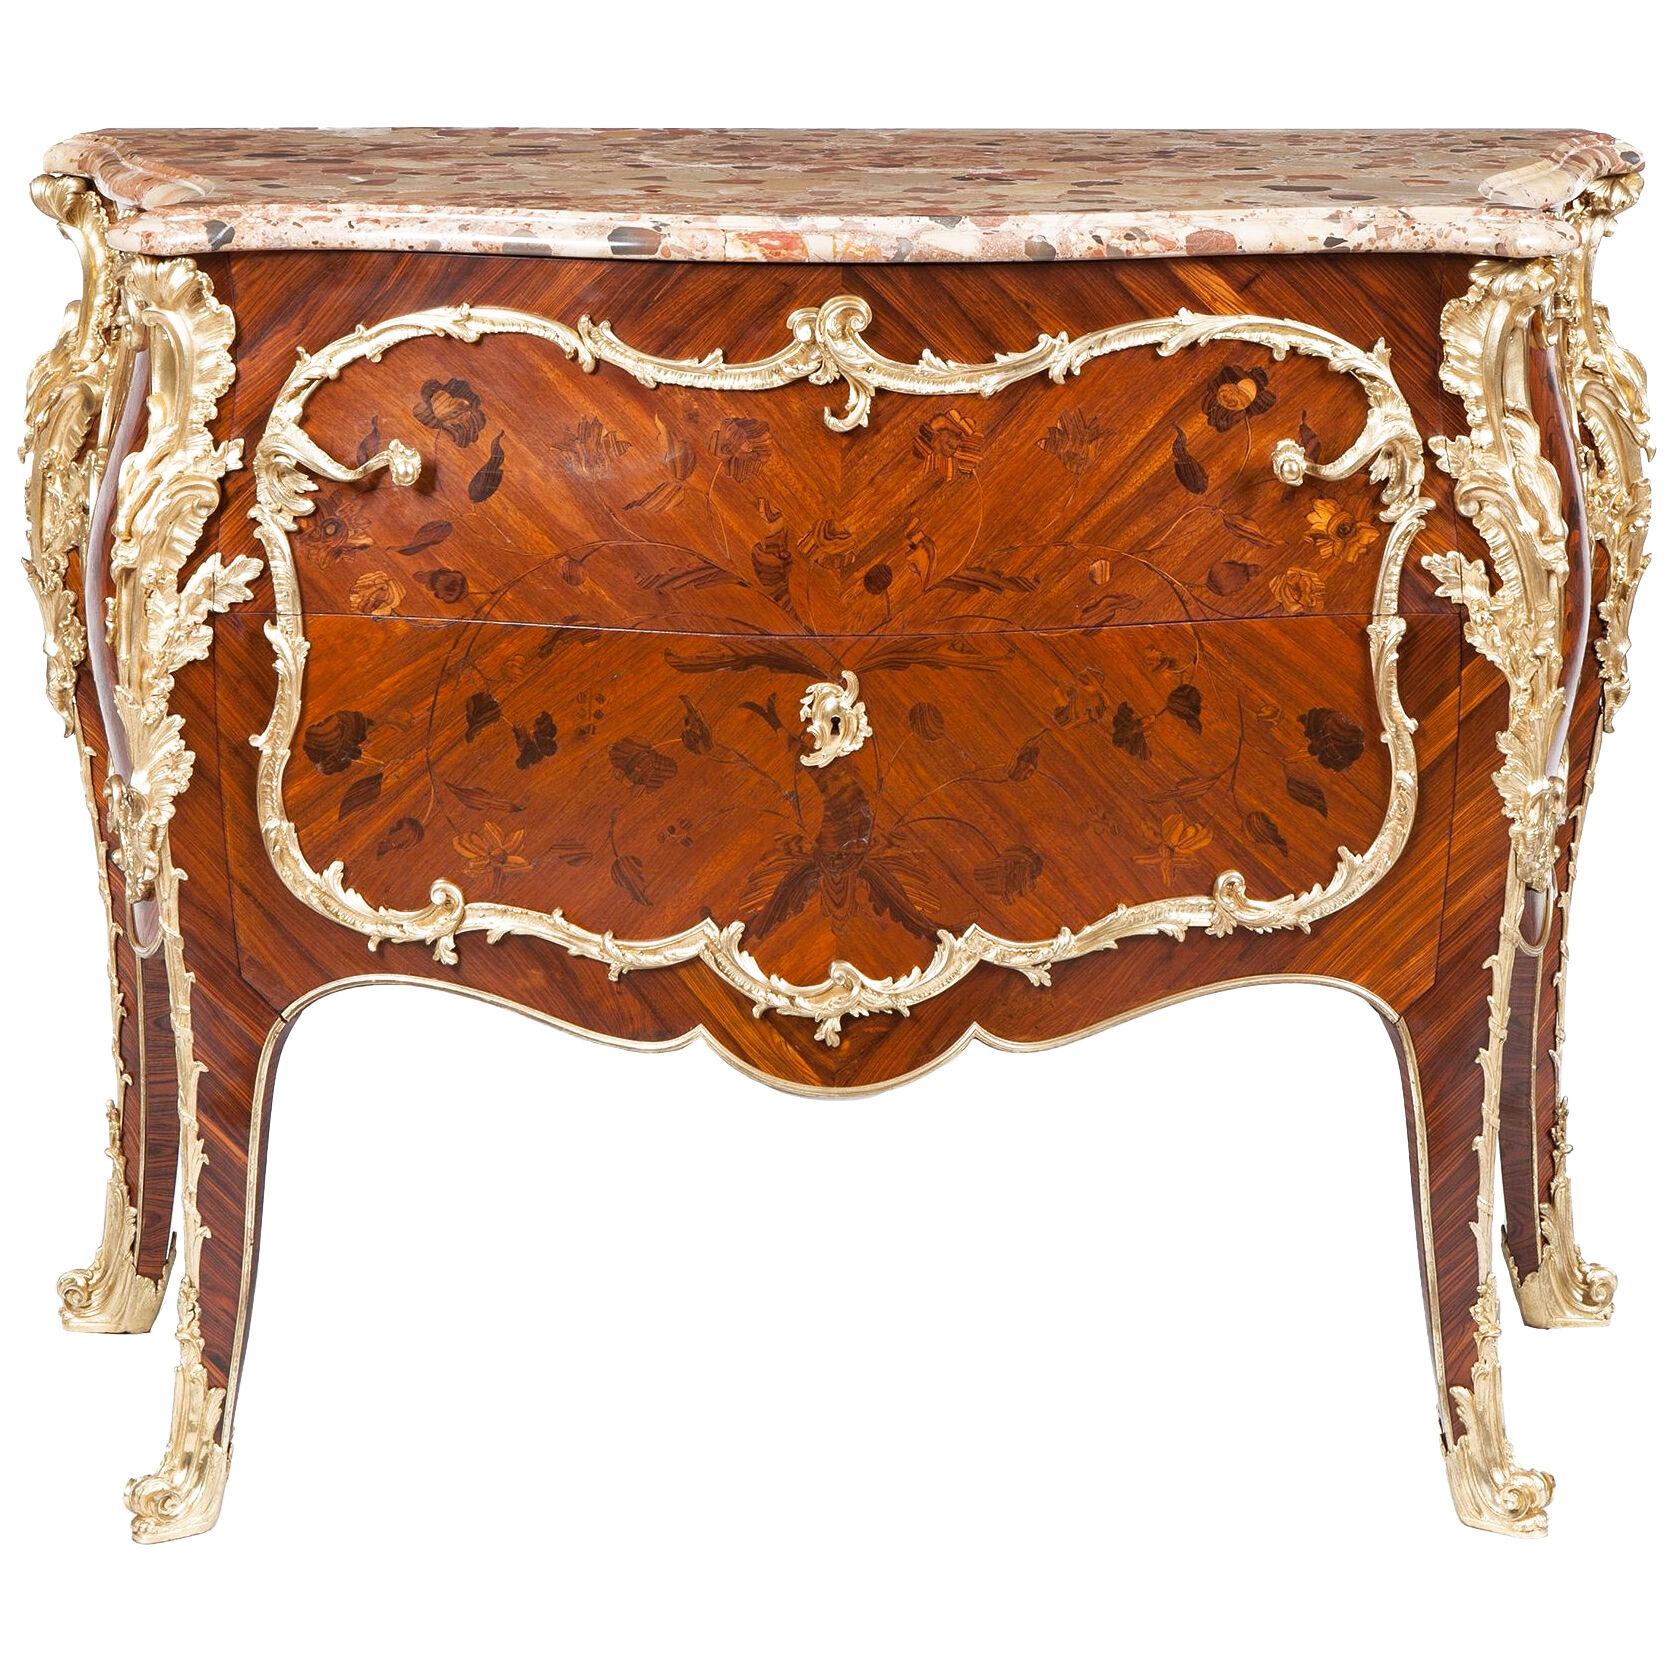 Rare 19th Century Commode in the Louis XV Manner